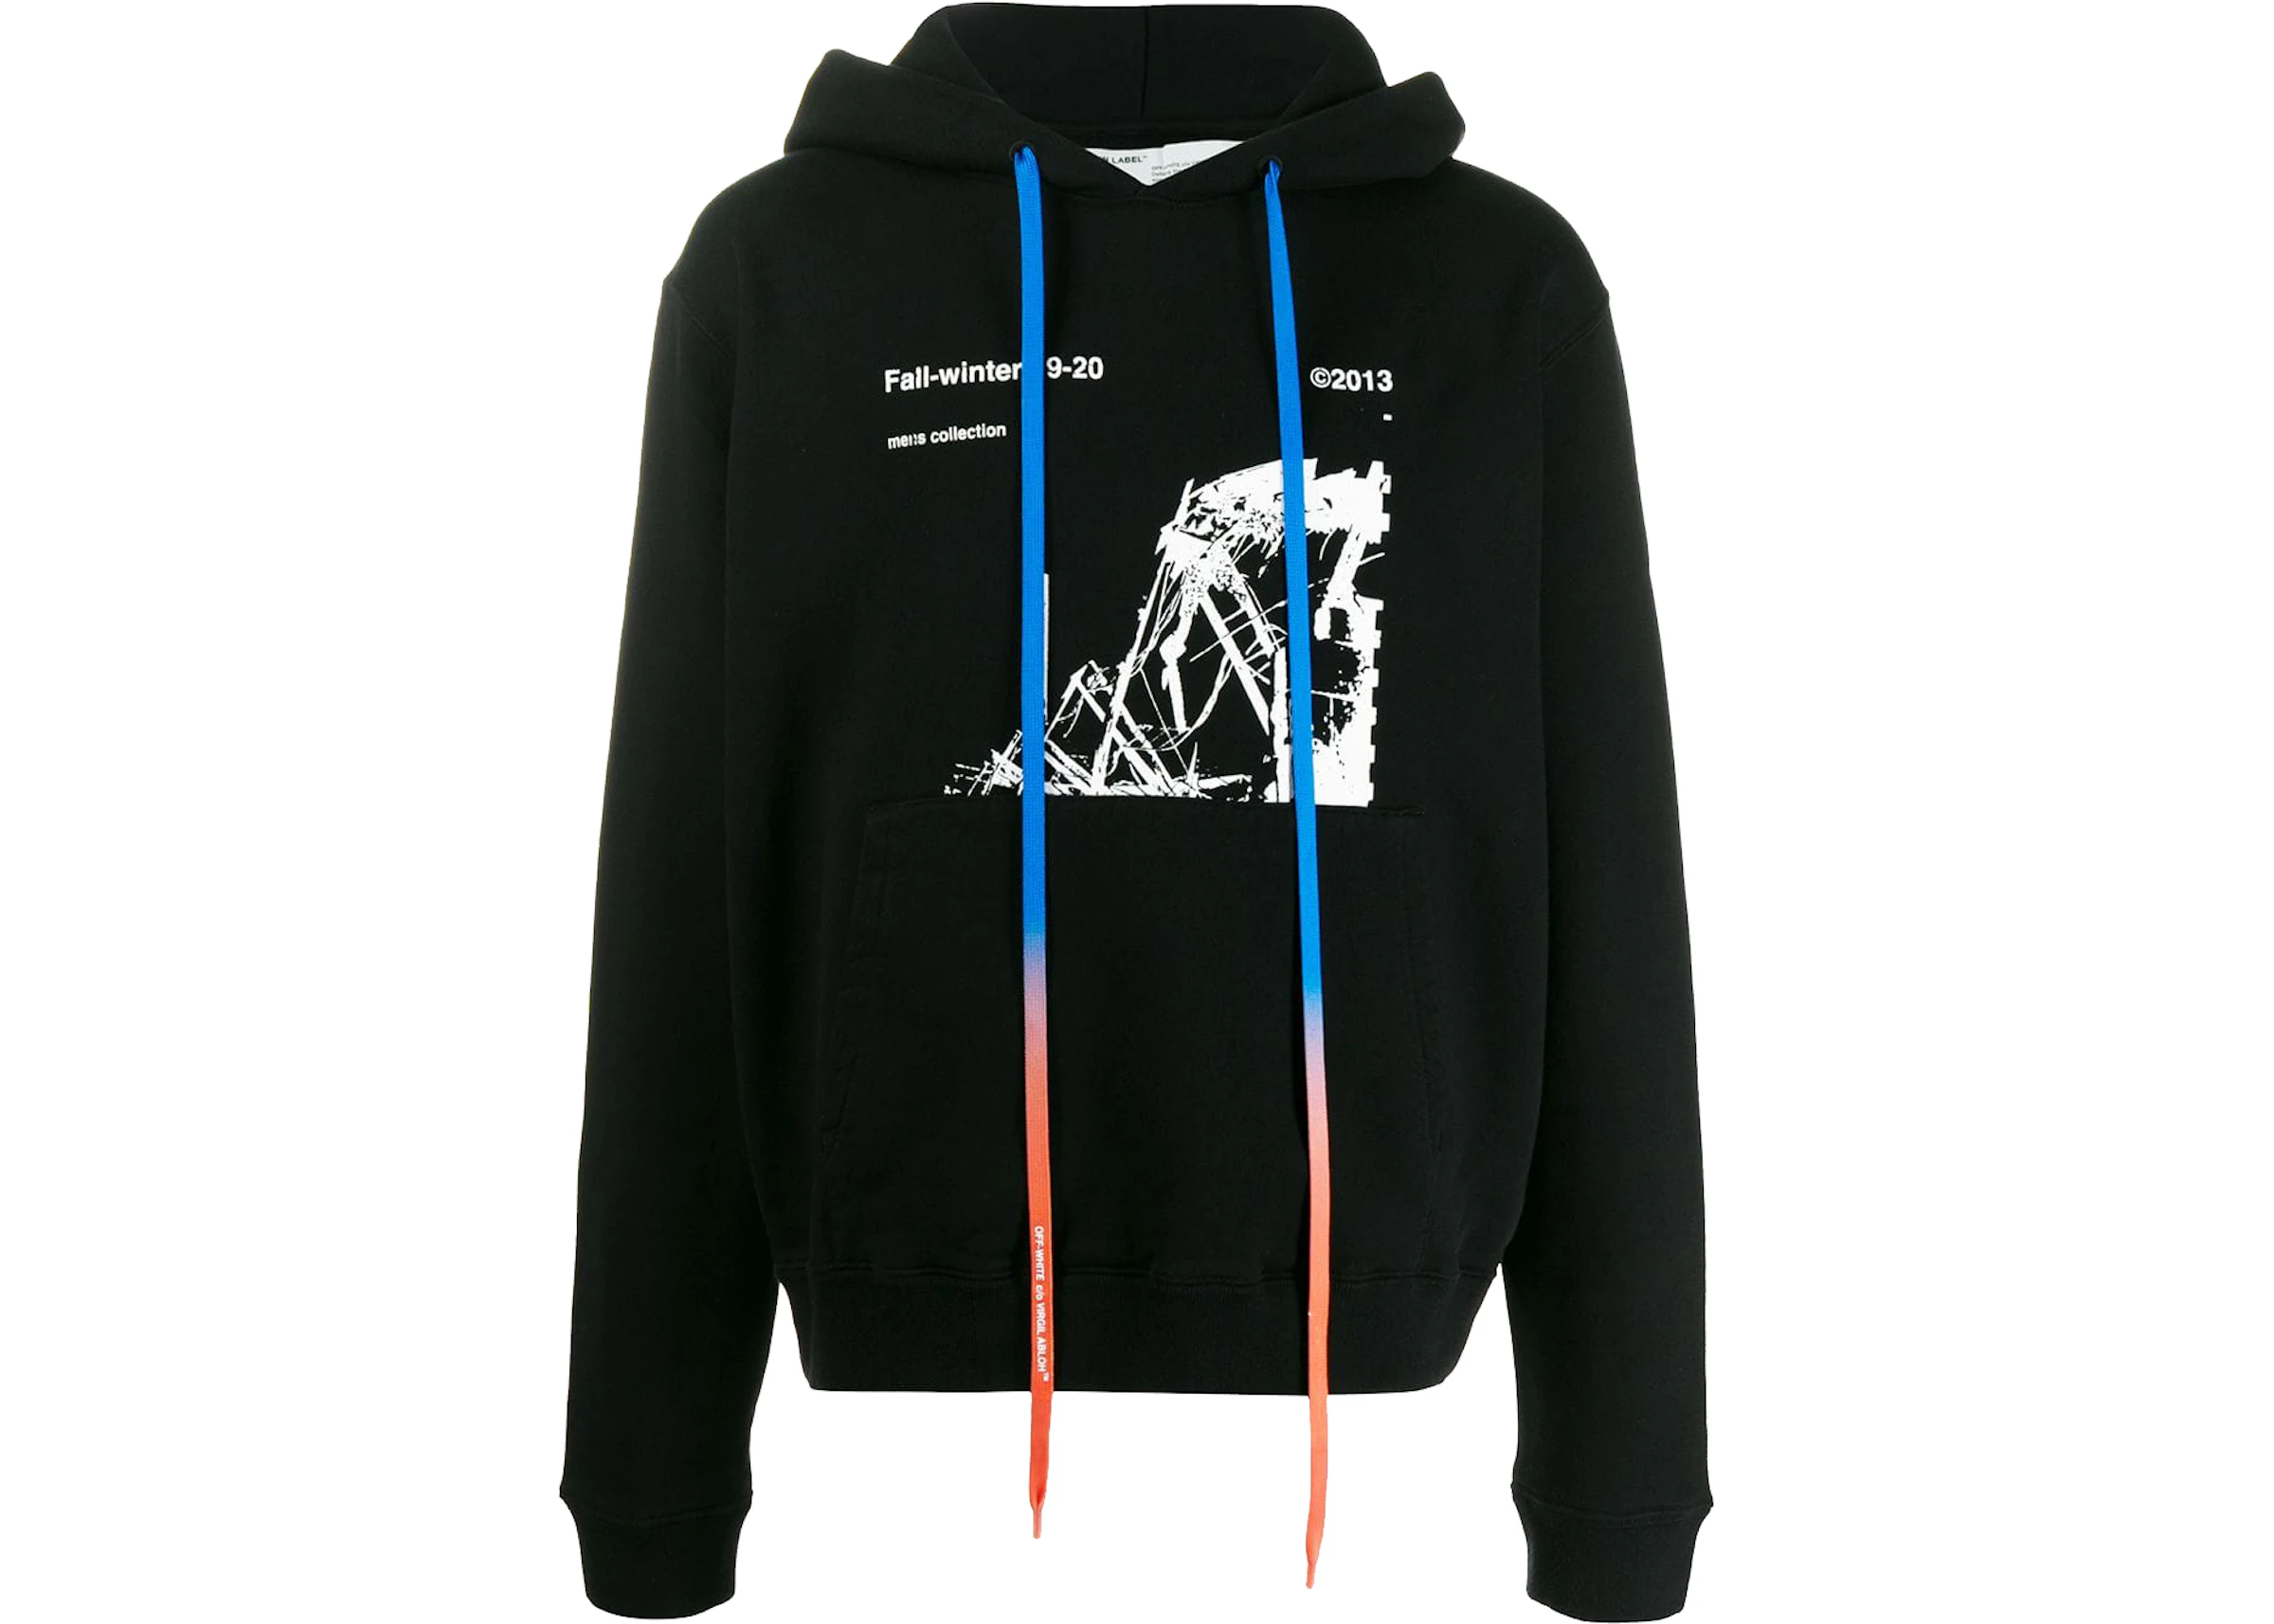 OFF-WHITE Ruined Factory Hoodie Black/White/Green - FW19 - GB